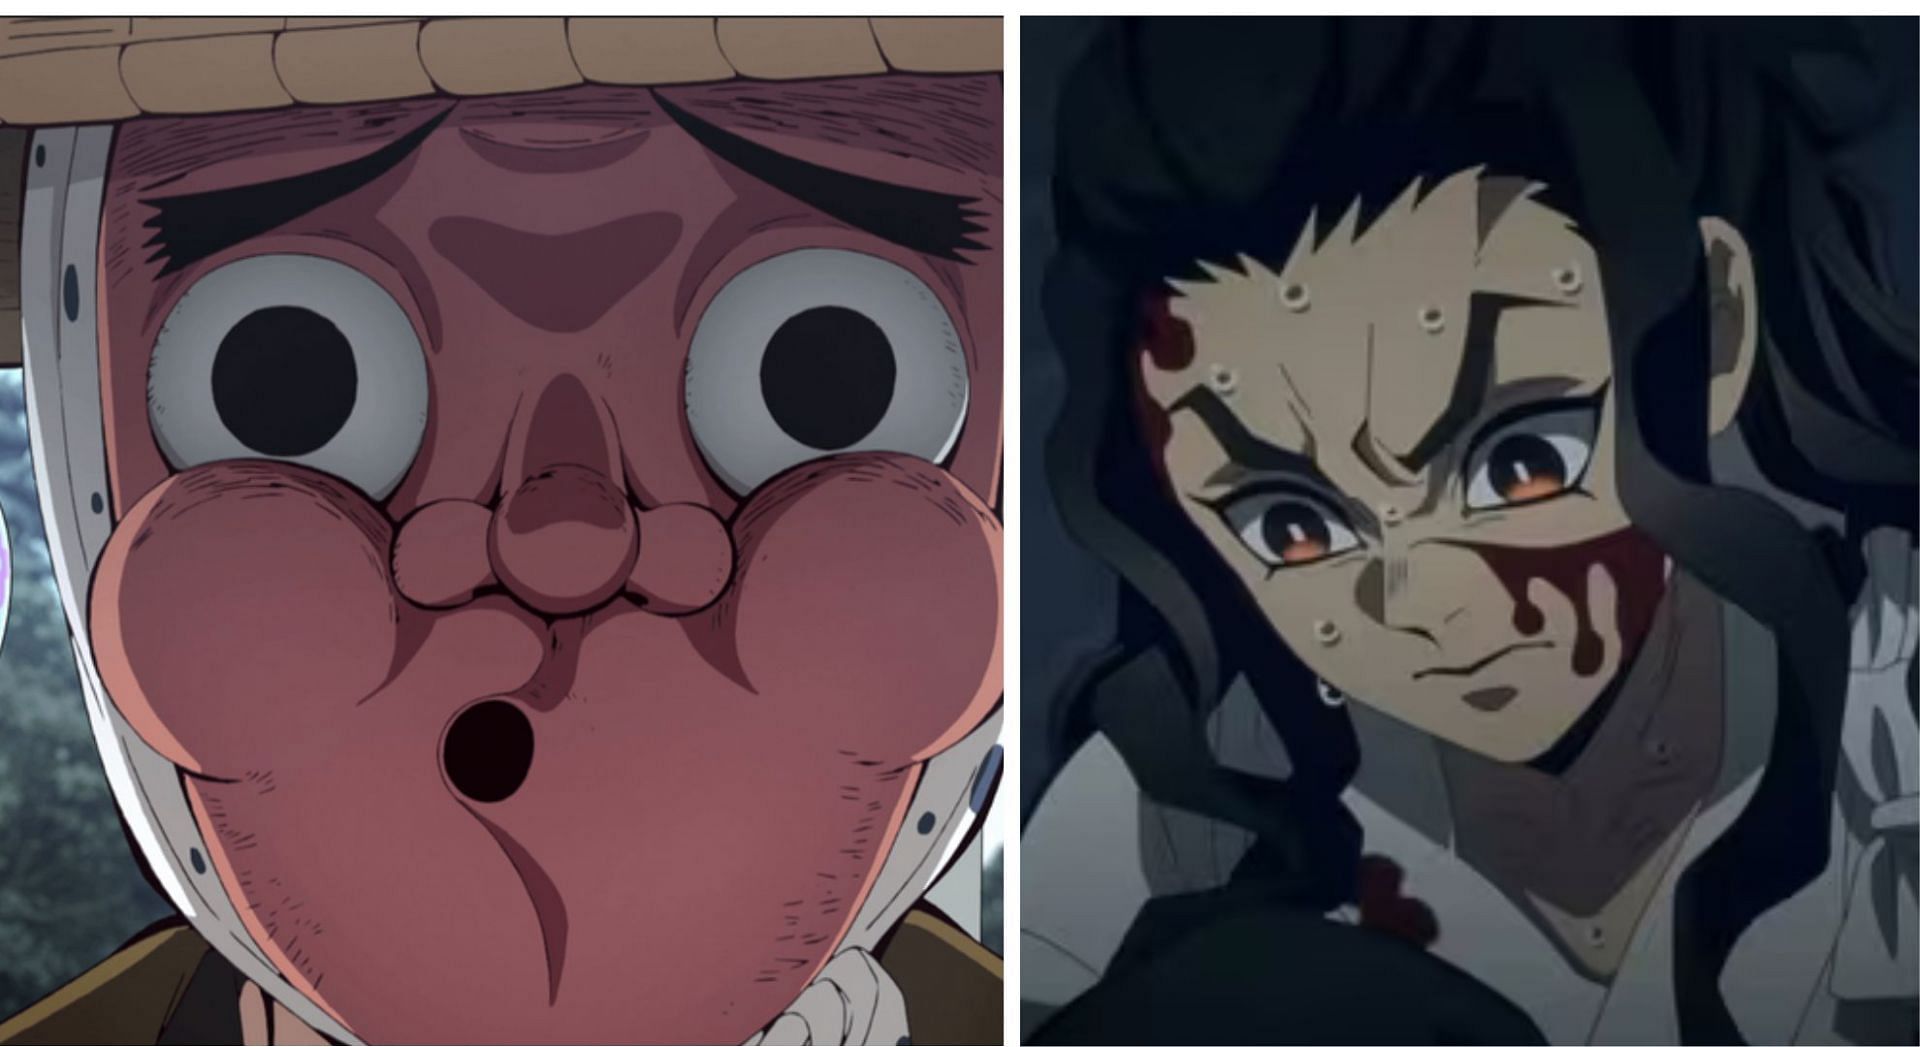 Demon slayer masked characters